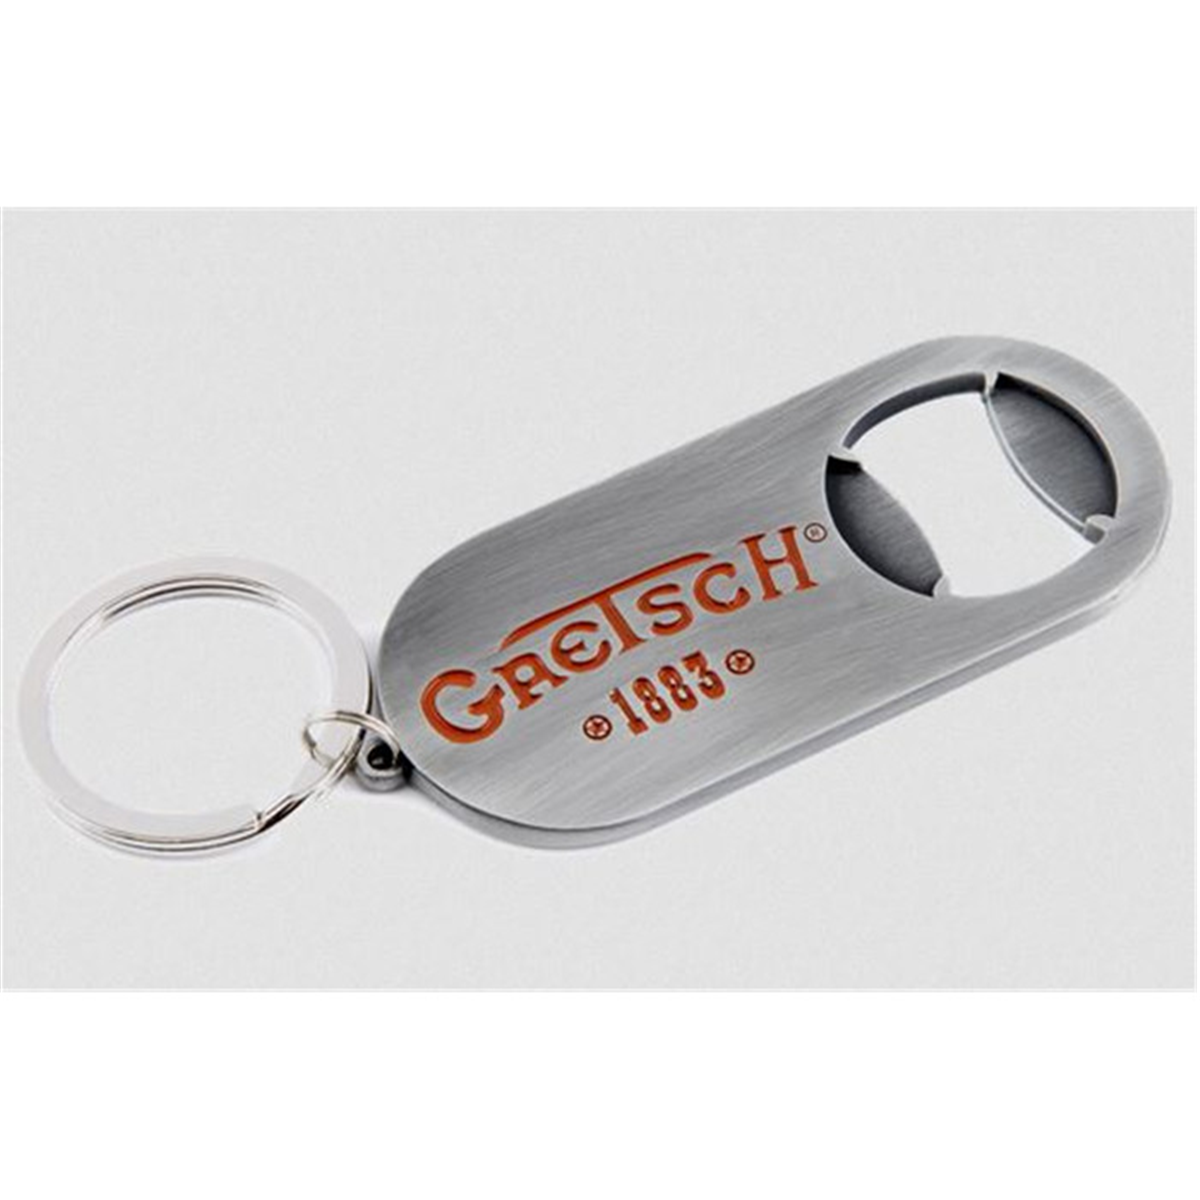 GRETSCH Porte Cle Ouvre bouteille